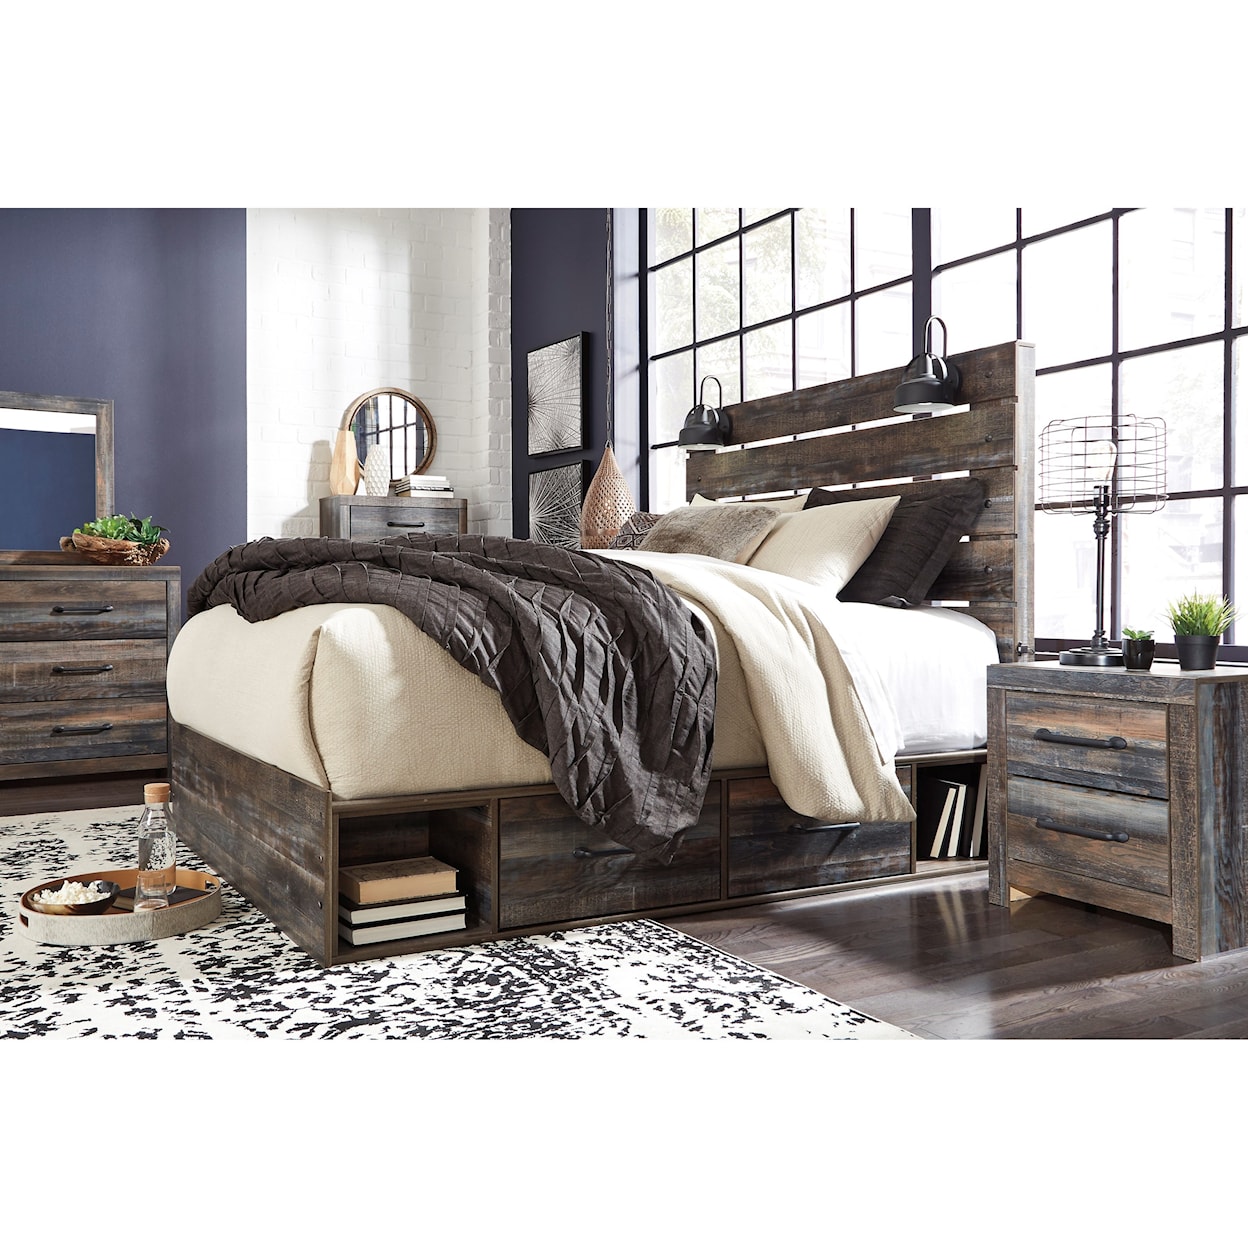 Signature Dalton Queen Storage Bed with 4 Drawers